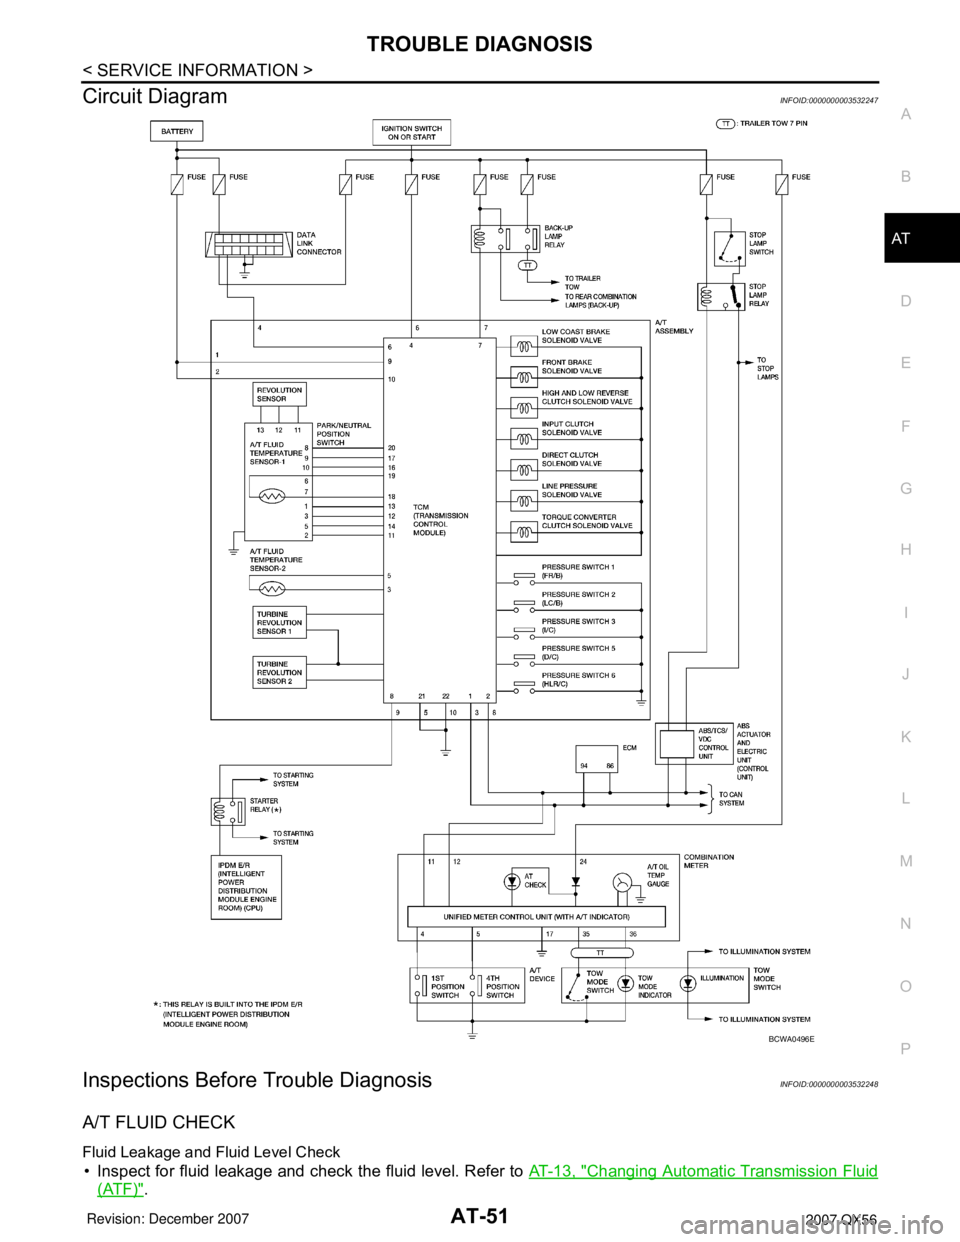 INFINITI QX56 2007  Factory Service Manual TROUBLE DIAGNOSIS
AT-51
< SERVICE INFORMATION >
D
E
F
G
H
I
J
K
L
MA
B
AT
N
O
P
Circuit DiagramINFOID:0000000003532247
Inspections Before Trouble DiagnosisINFOID:0000000003532248
A/T FLUID CHECK
Fluid